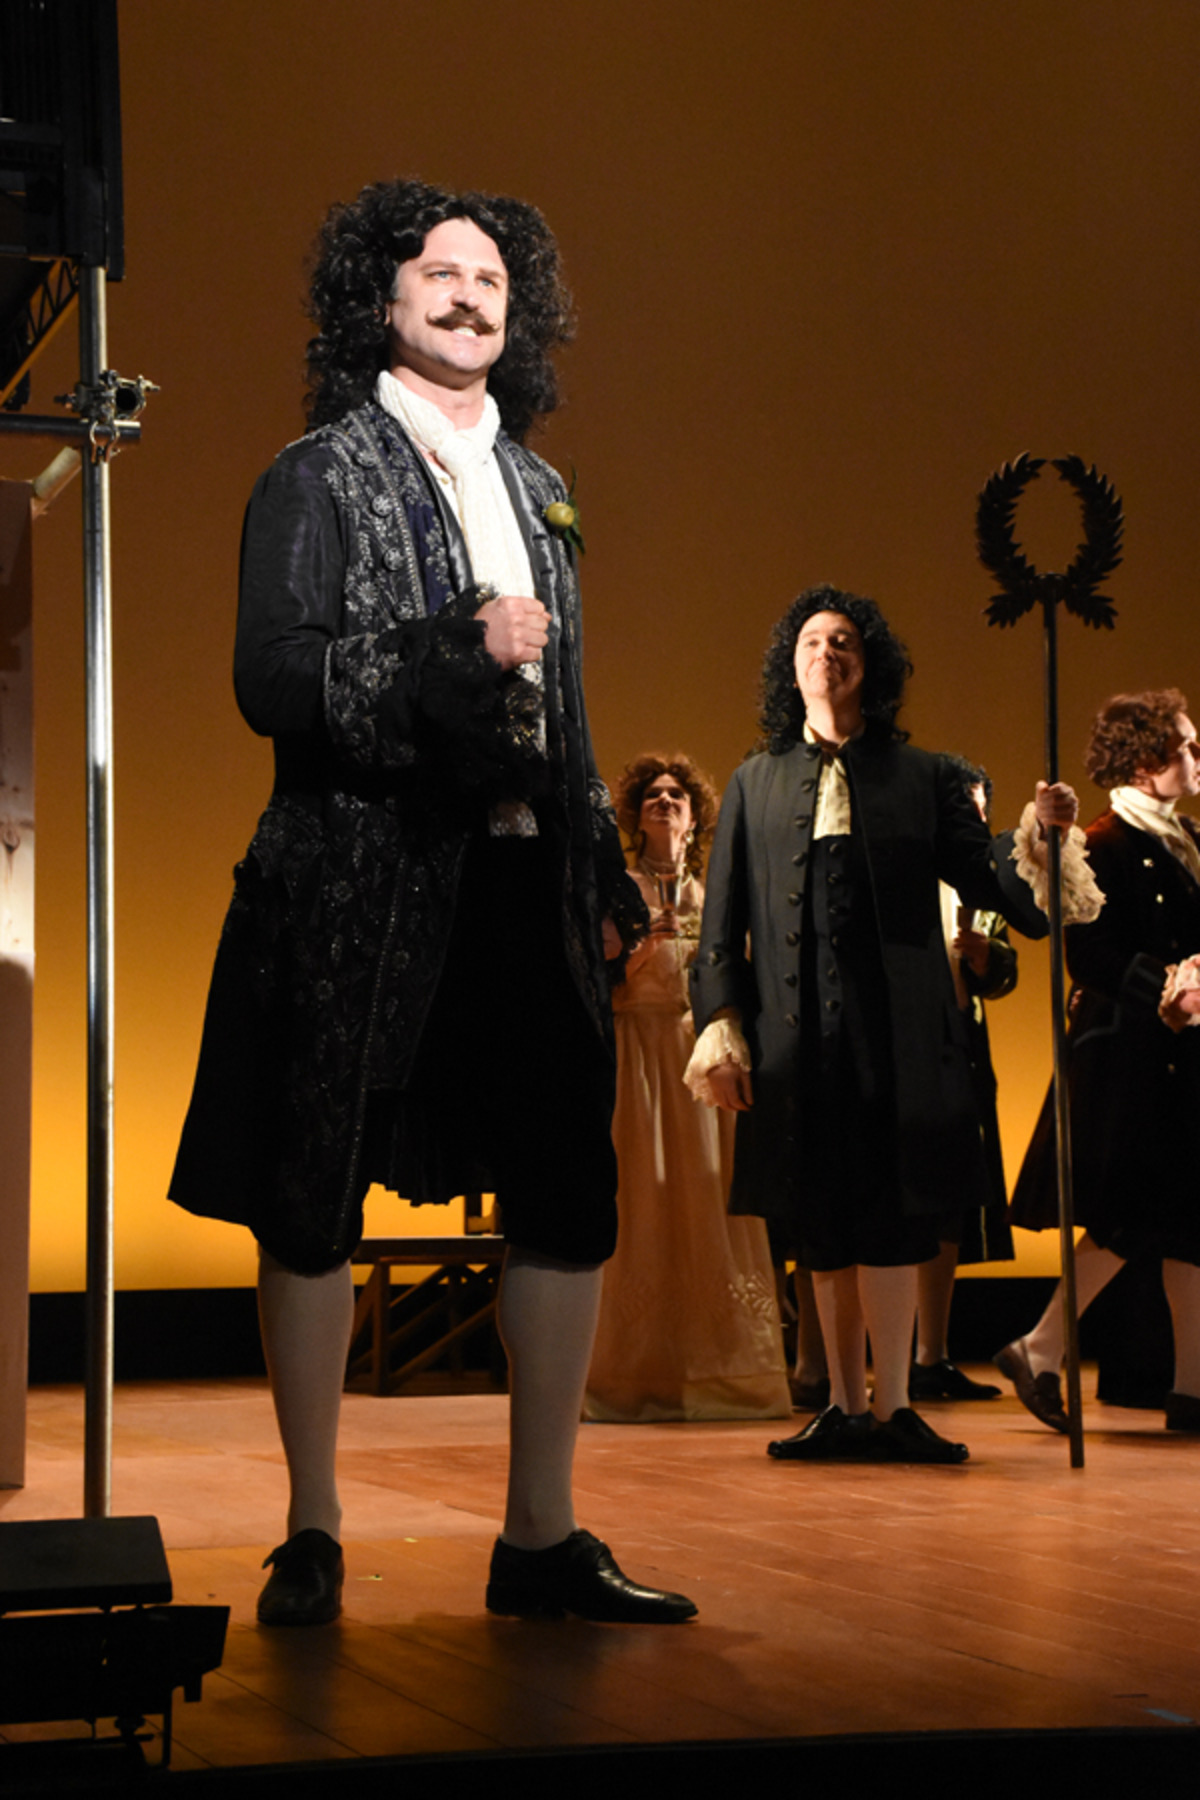   Charles II (M. Schreiner), with the court looking on - Photo credit Tina Buckman  